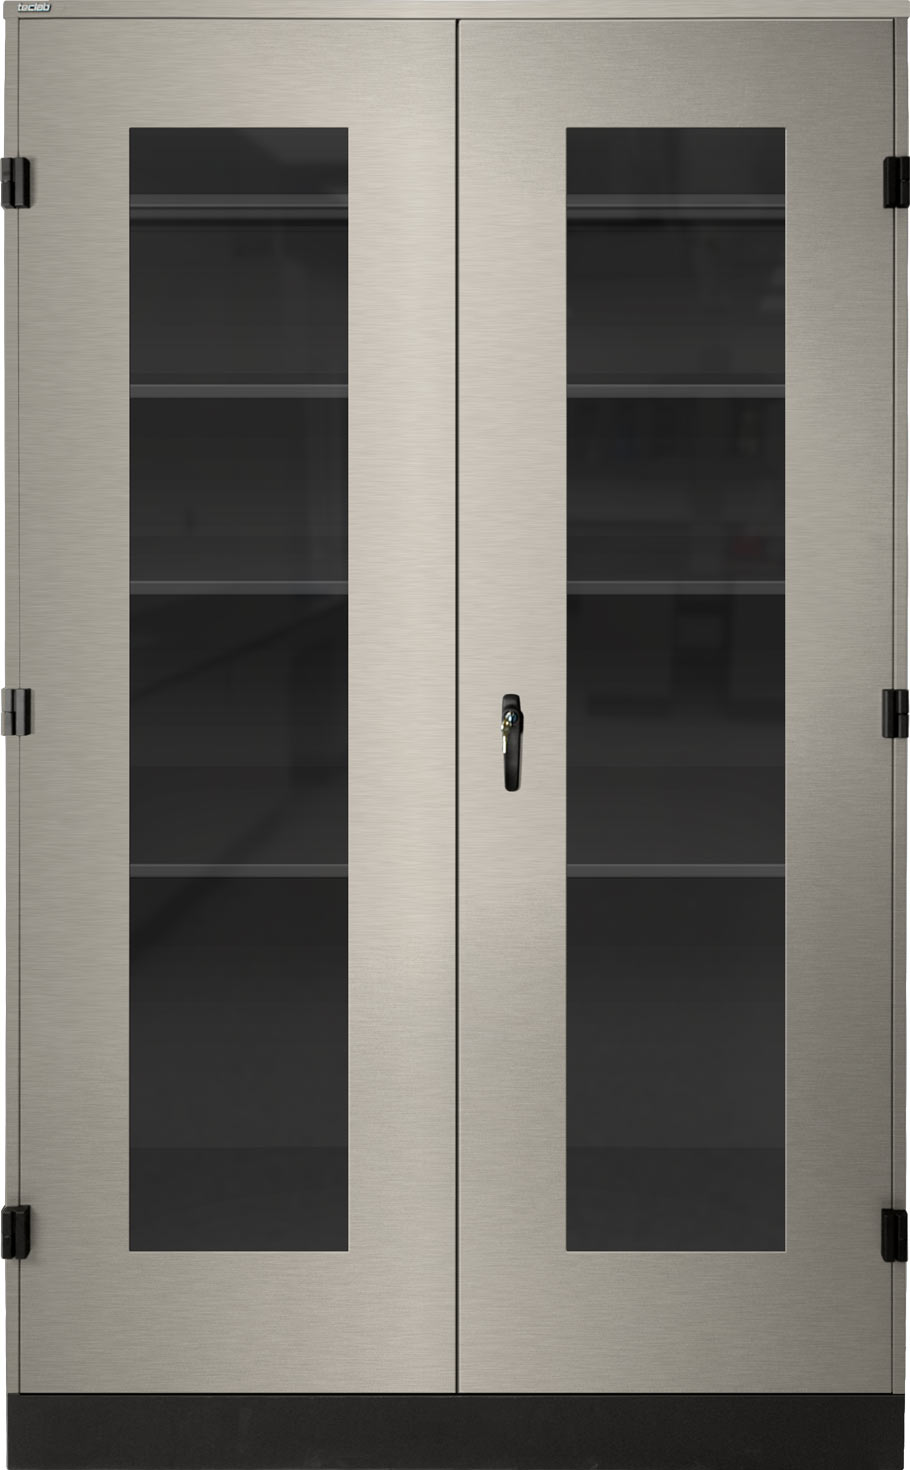 Teclab Stainless Steel Tall Storage Cabinets